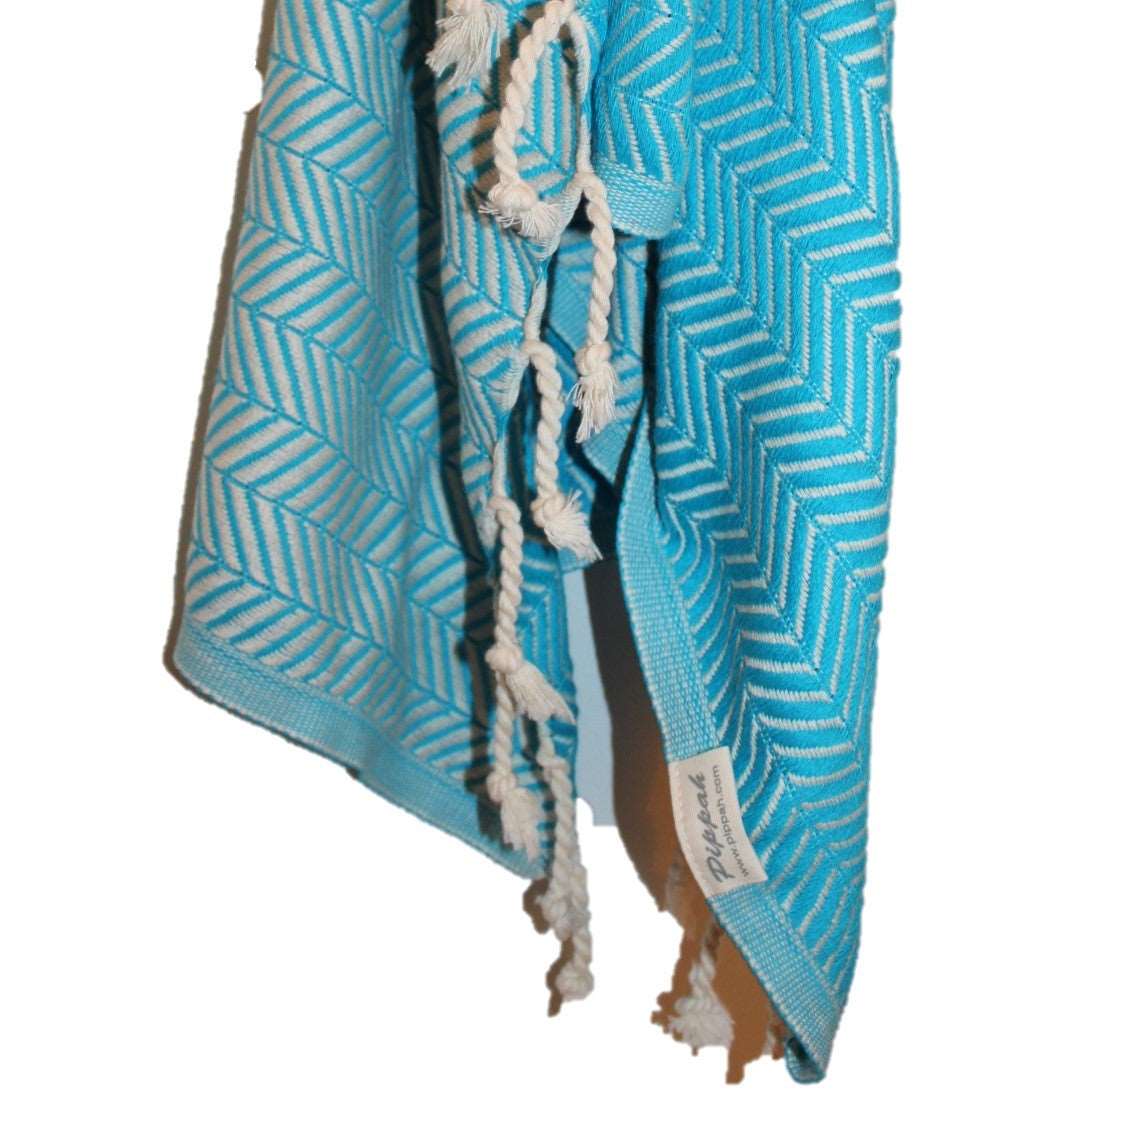 Handcrafted-Turkish-towels-by-Pippah